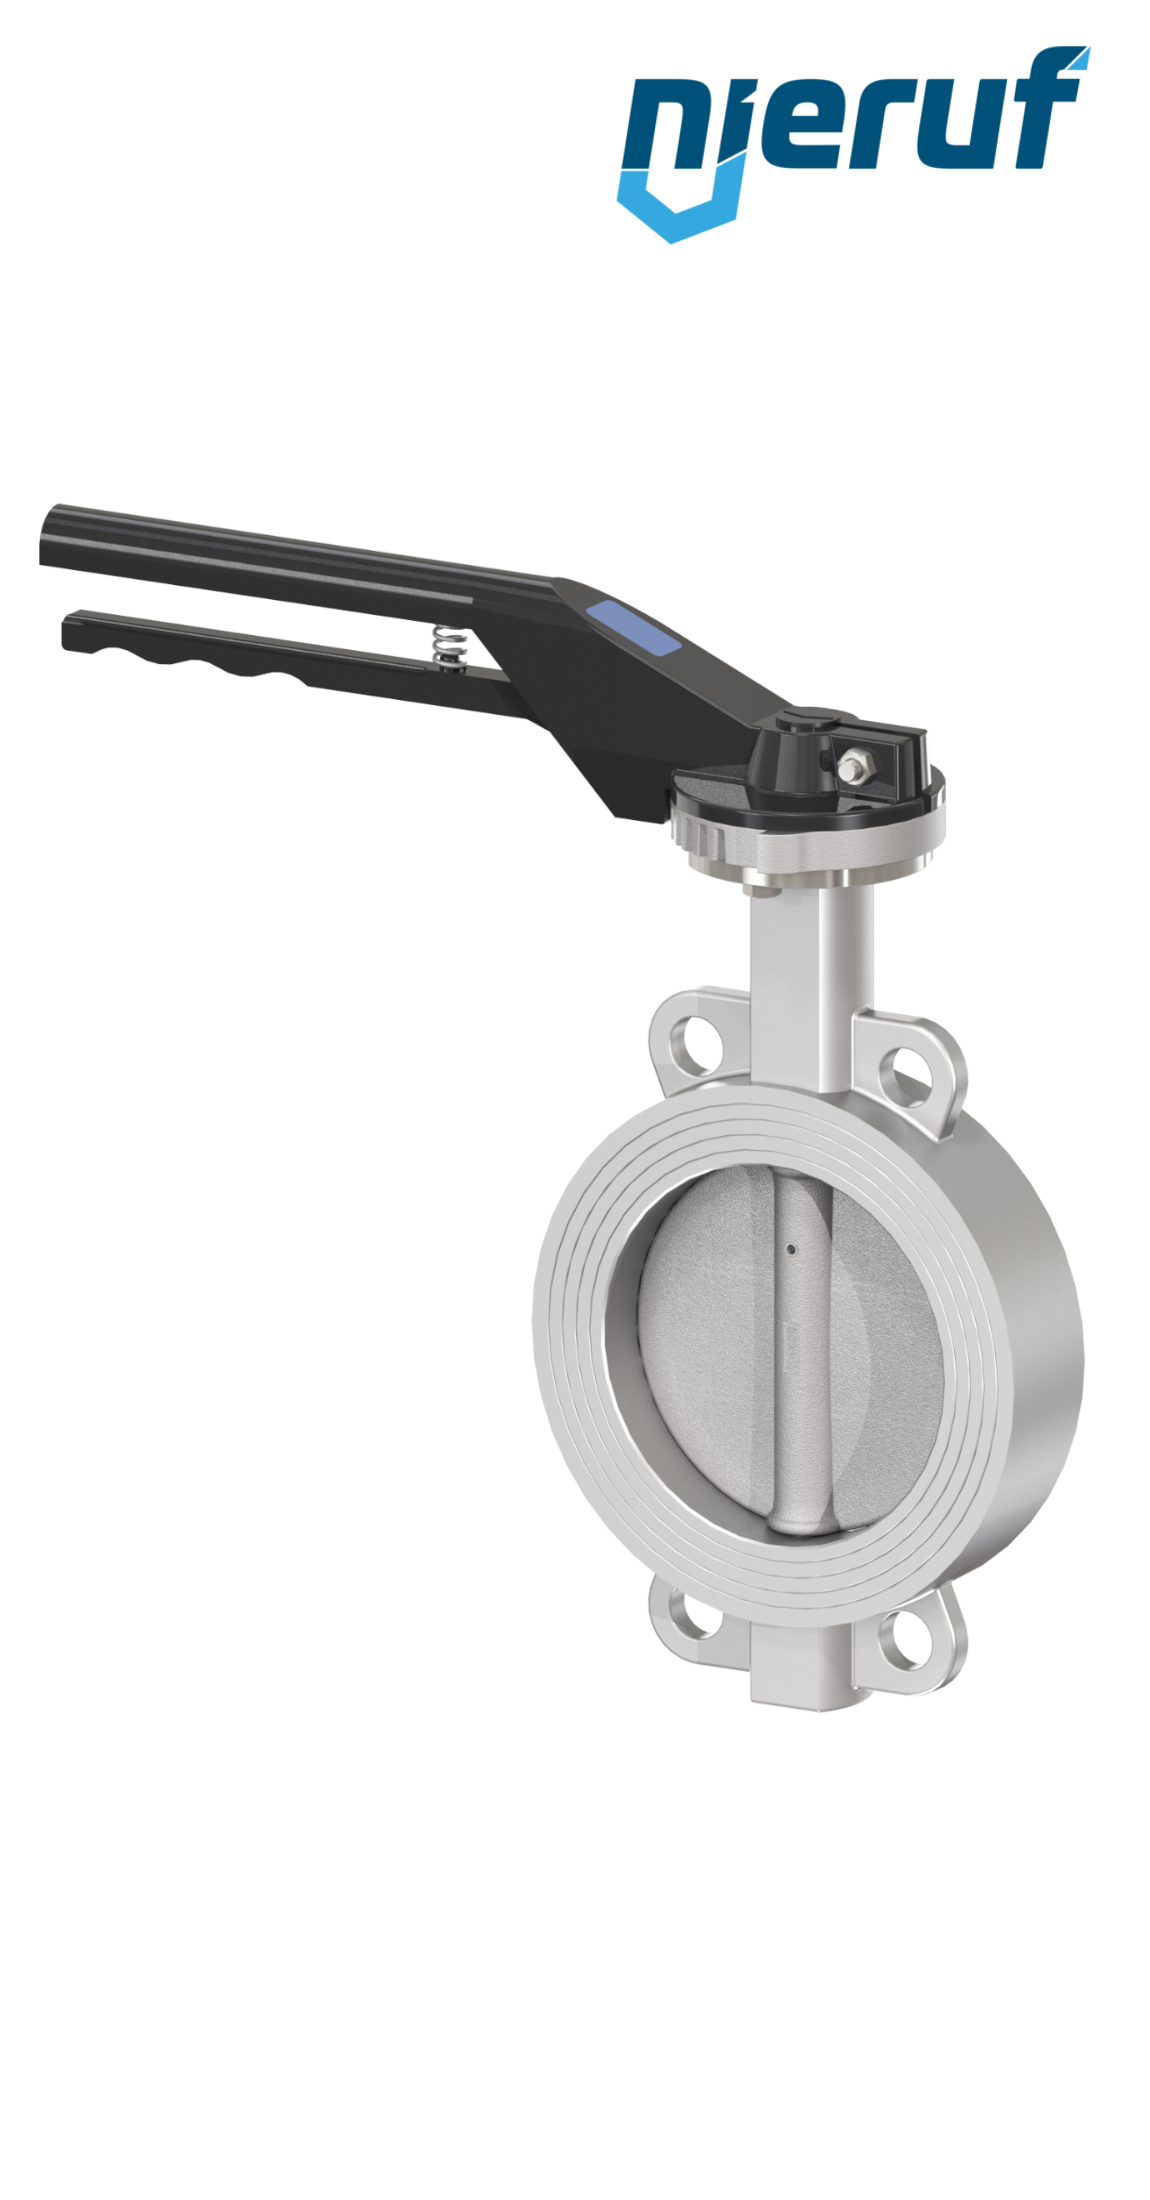 Butterfly-valve-stainless-steel DN 100 PN16 AK08 metall notch lever